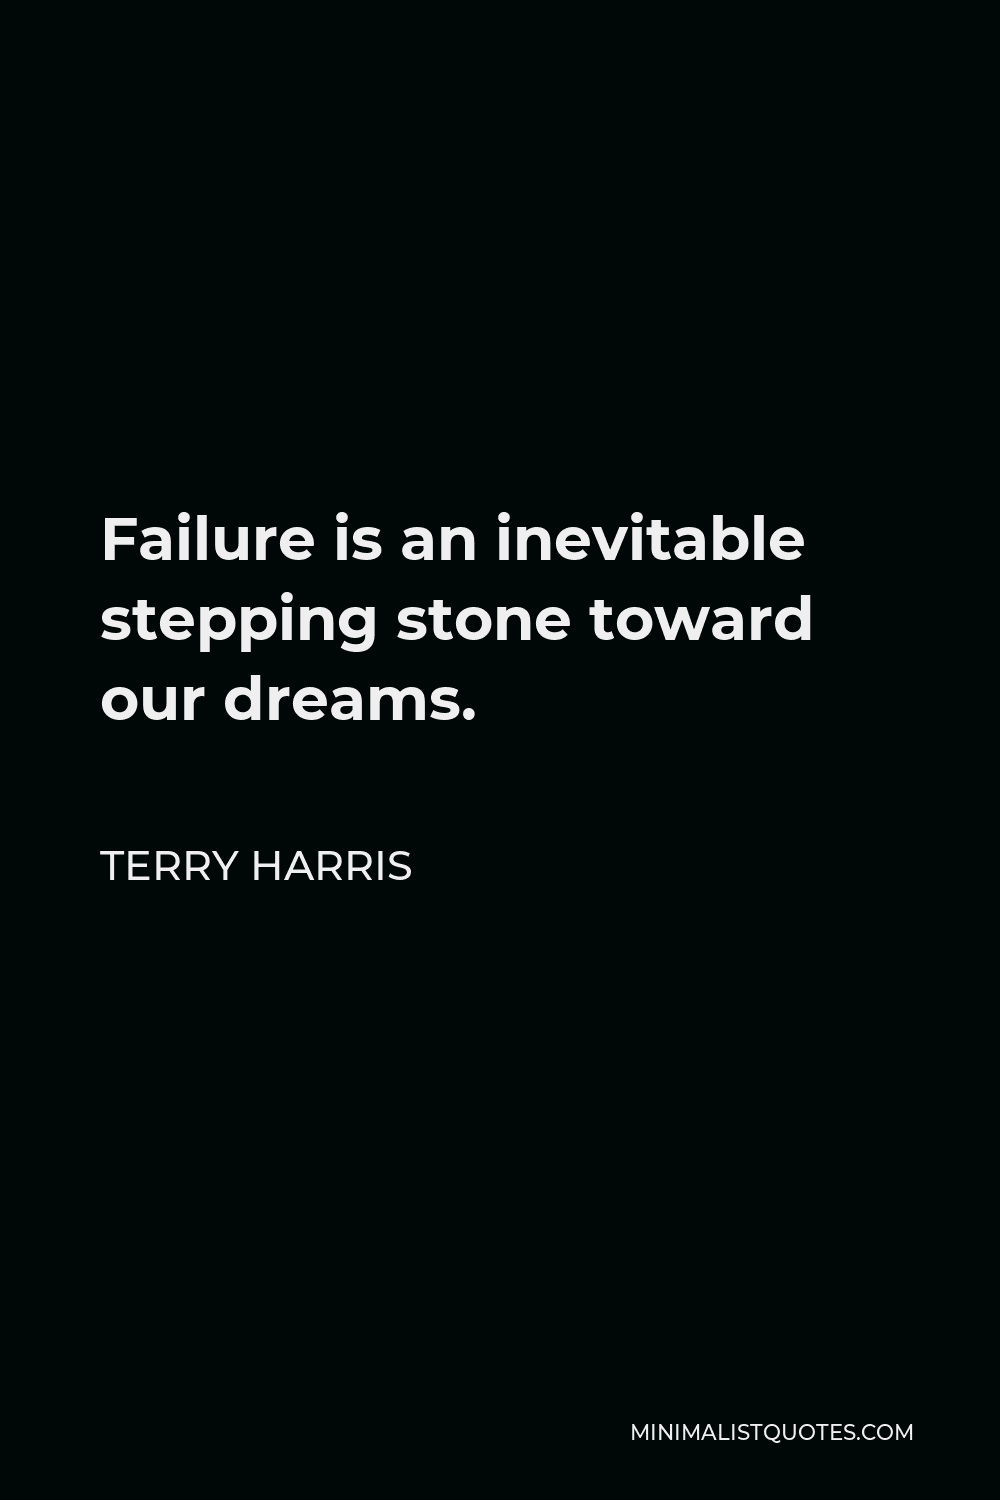 Terry Harris Quote - Failure is an inevitable stepping stone toward our dreams.